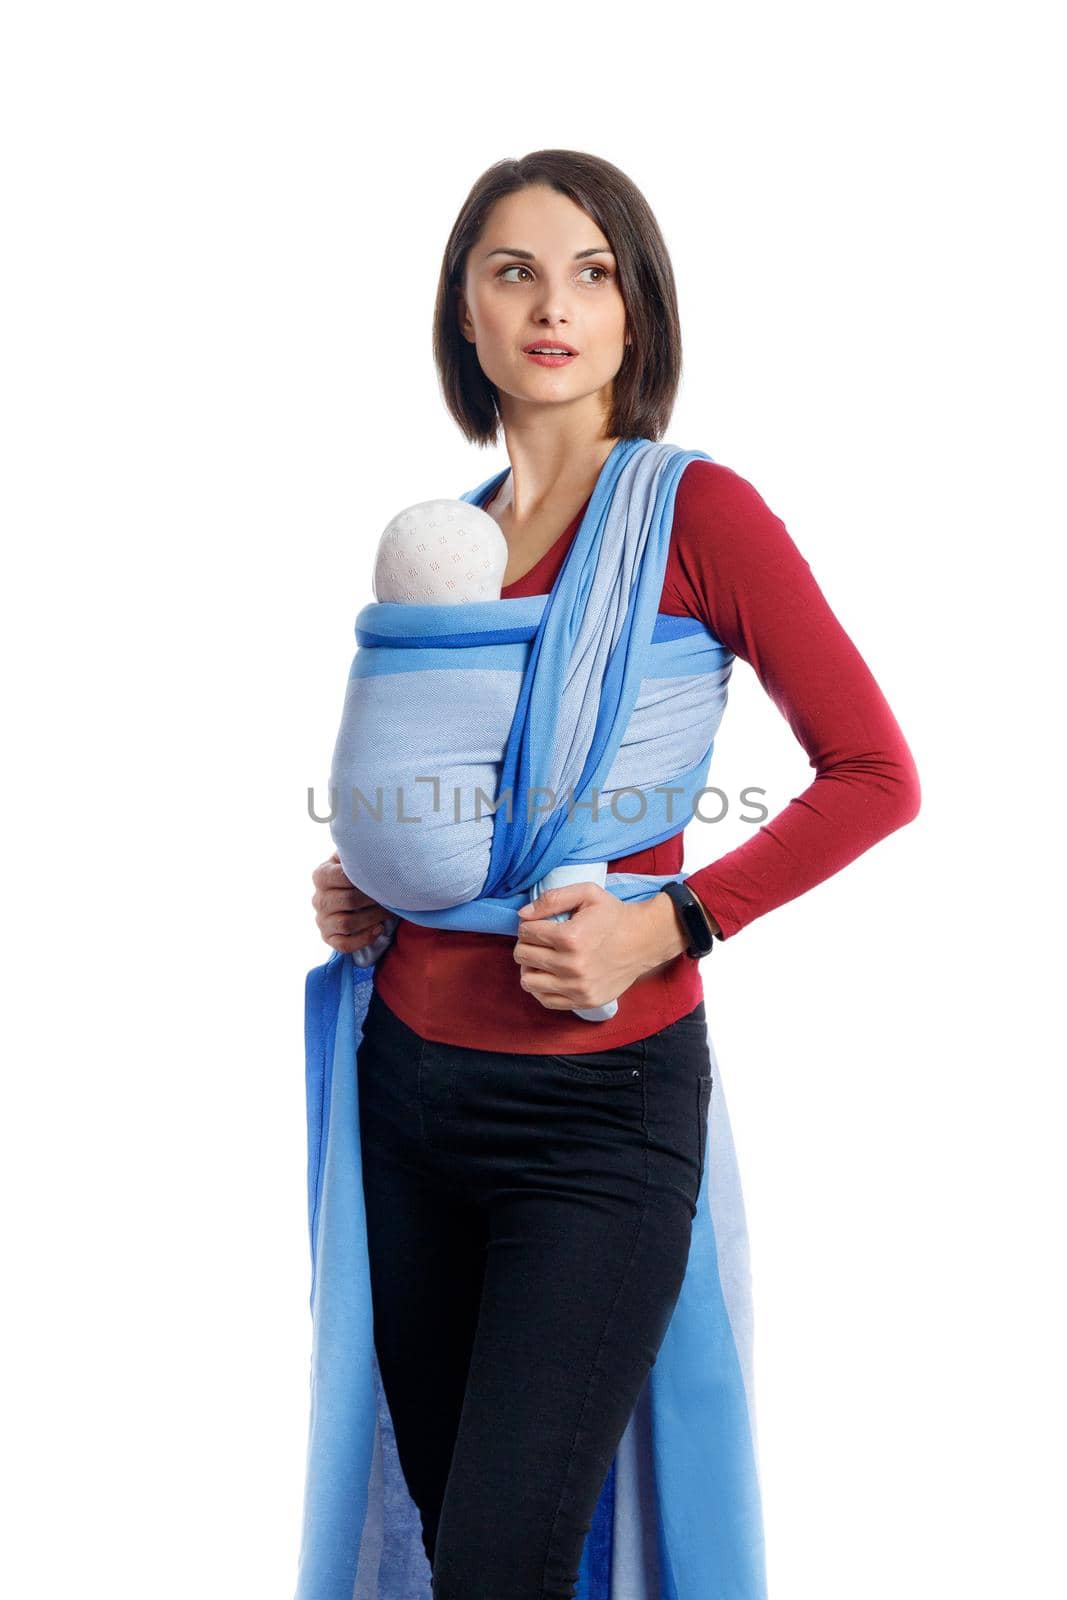 Babywearing attractive young mother with baby in blue woven wrap carrier. Free hands and active motherhood concept idea by Rom4ek